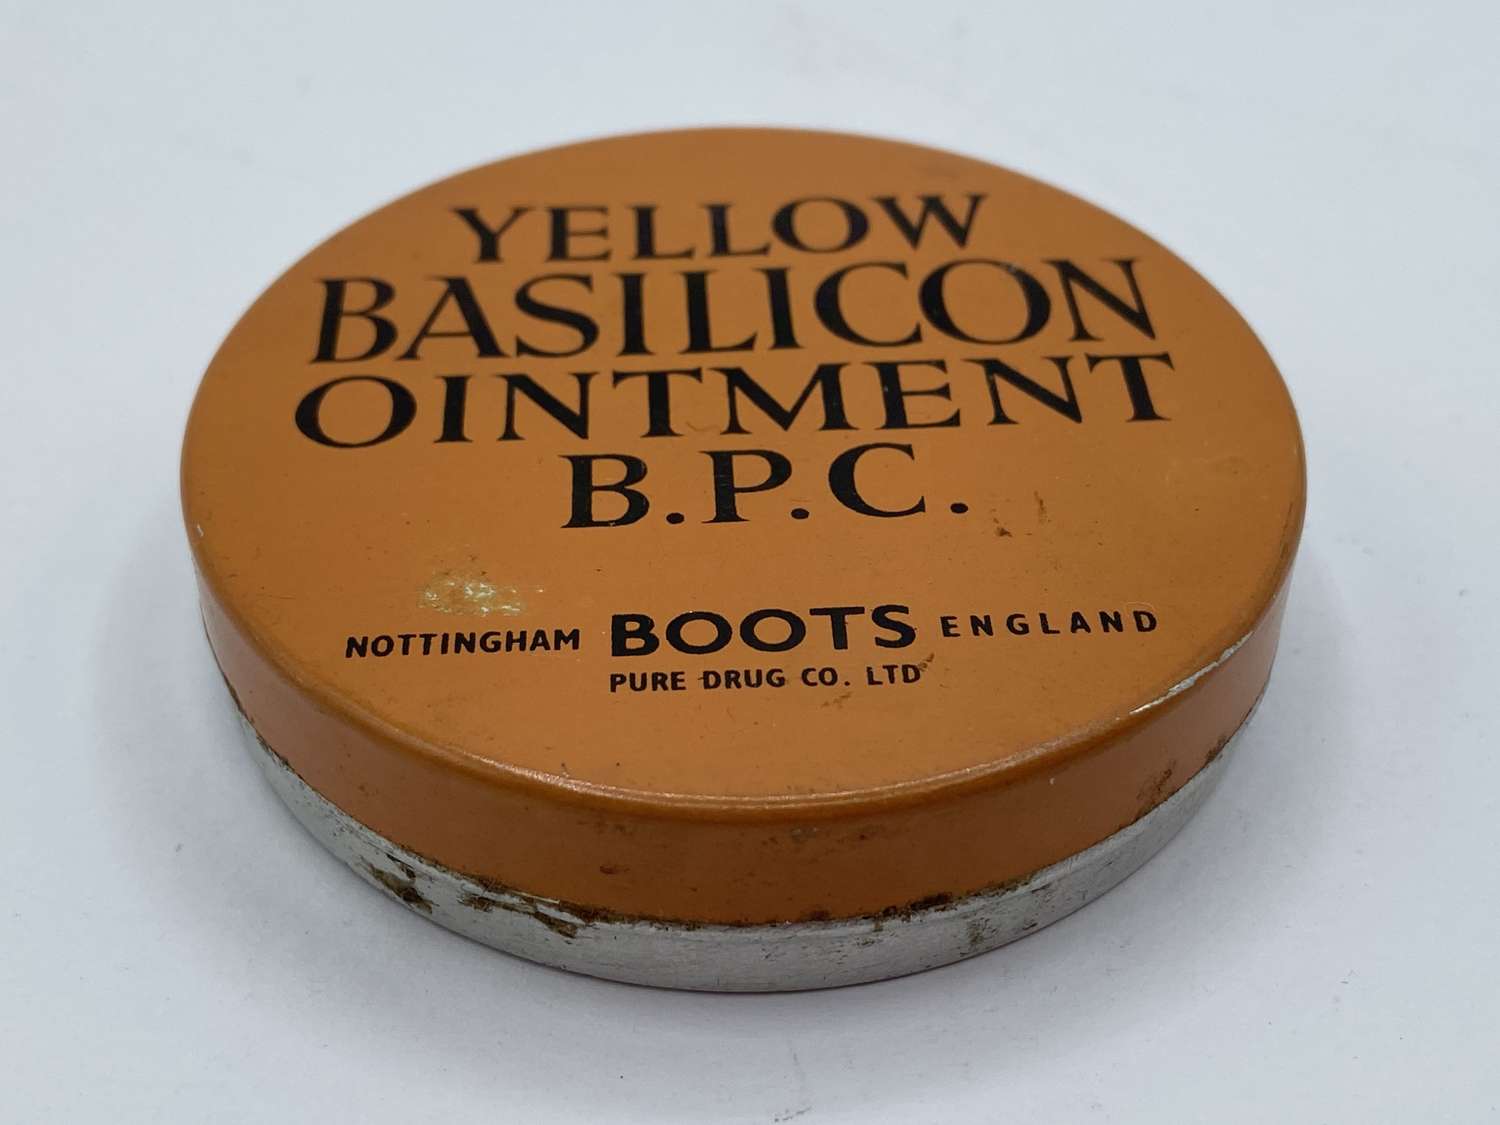 WW2 British Pharmaceutical Home Front Unopened Basilicon Ointment